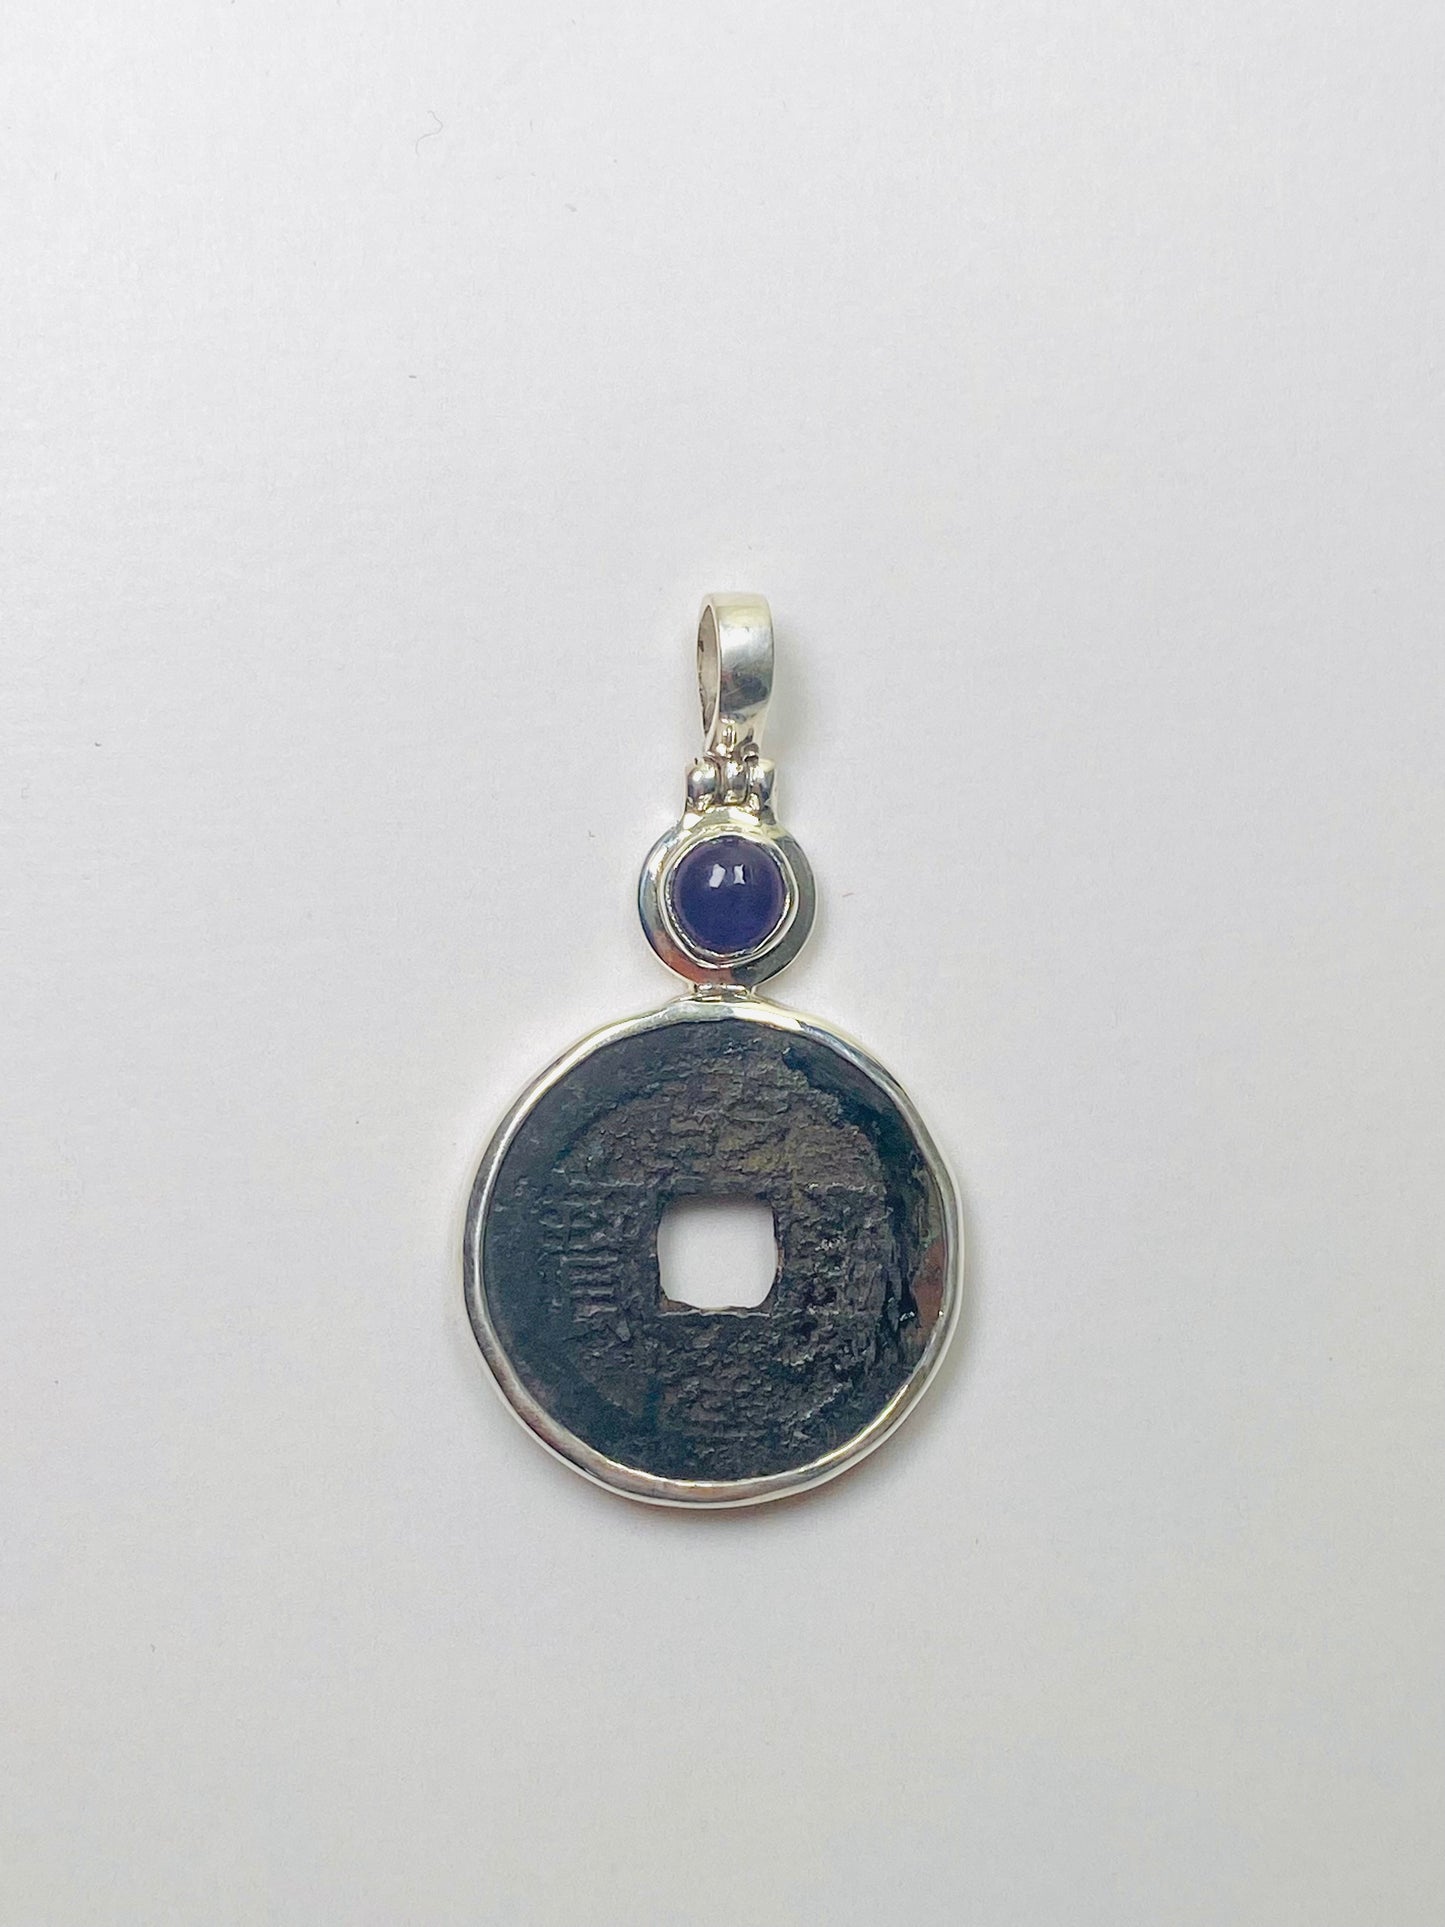 Antique Qing Dynasty Qianlong Reign (1735-1796) Cash Coin Pendant in Sterling Silver w Amethyst